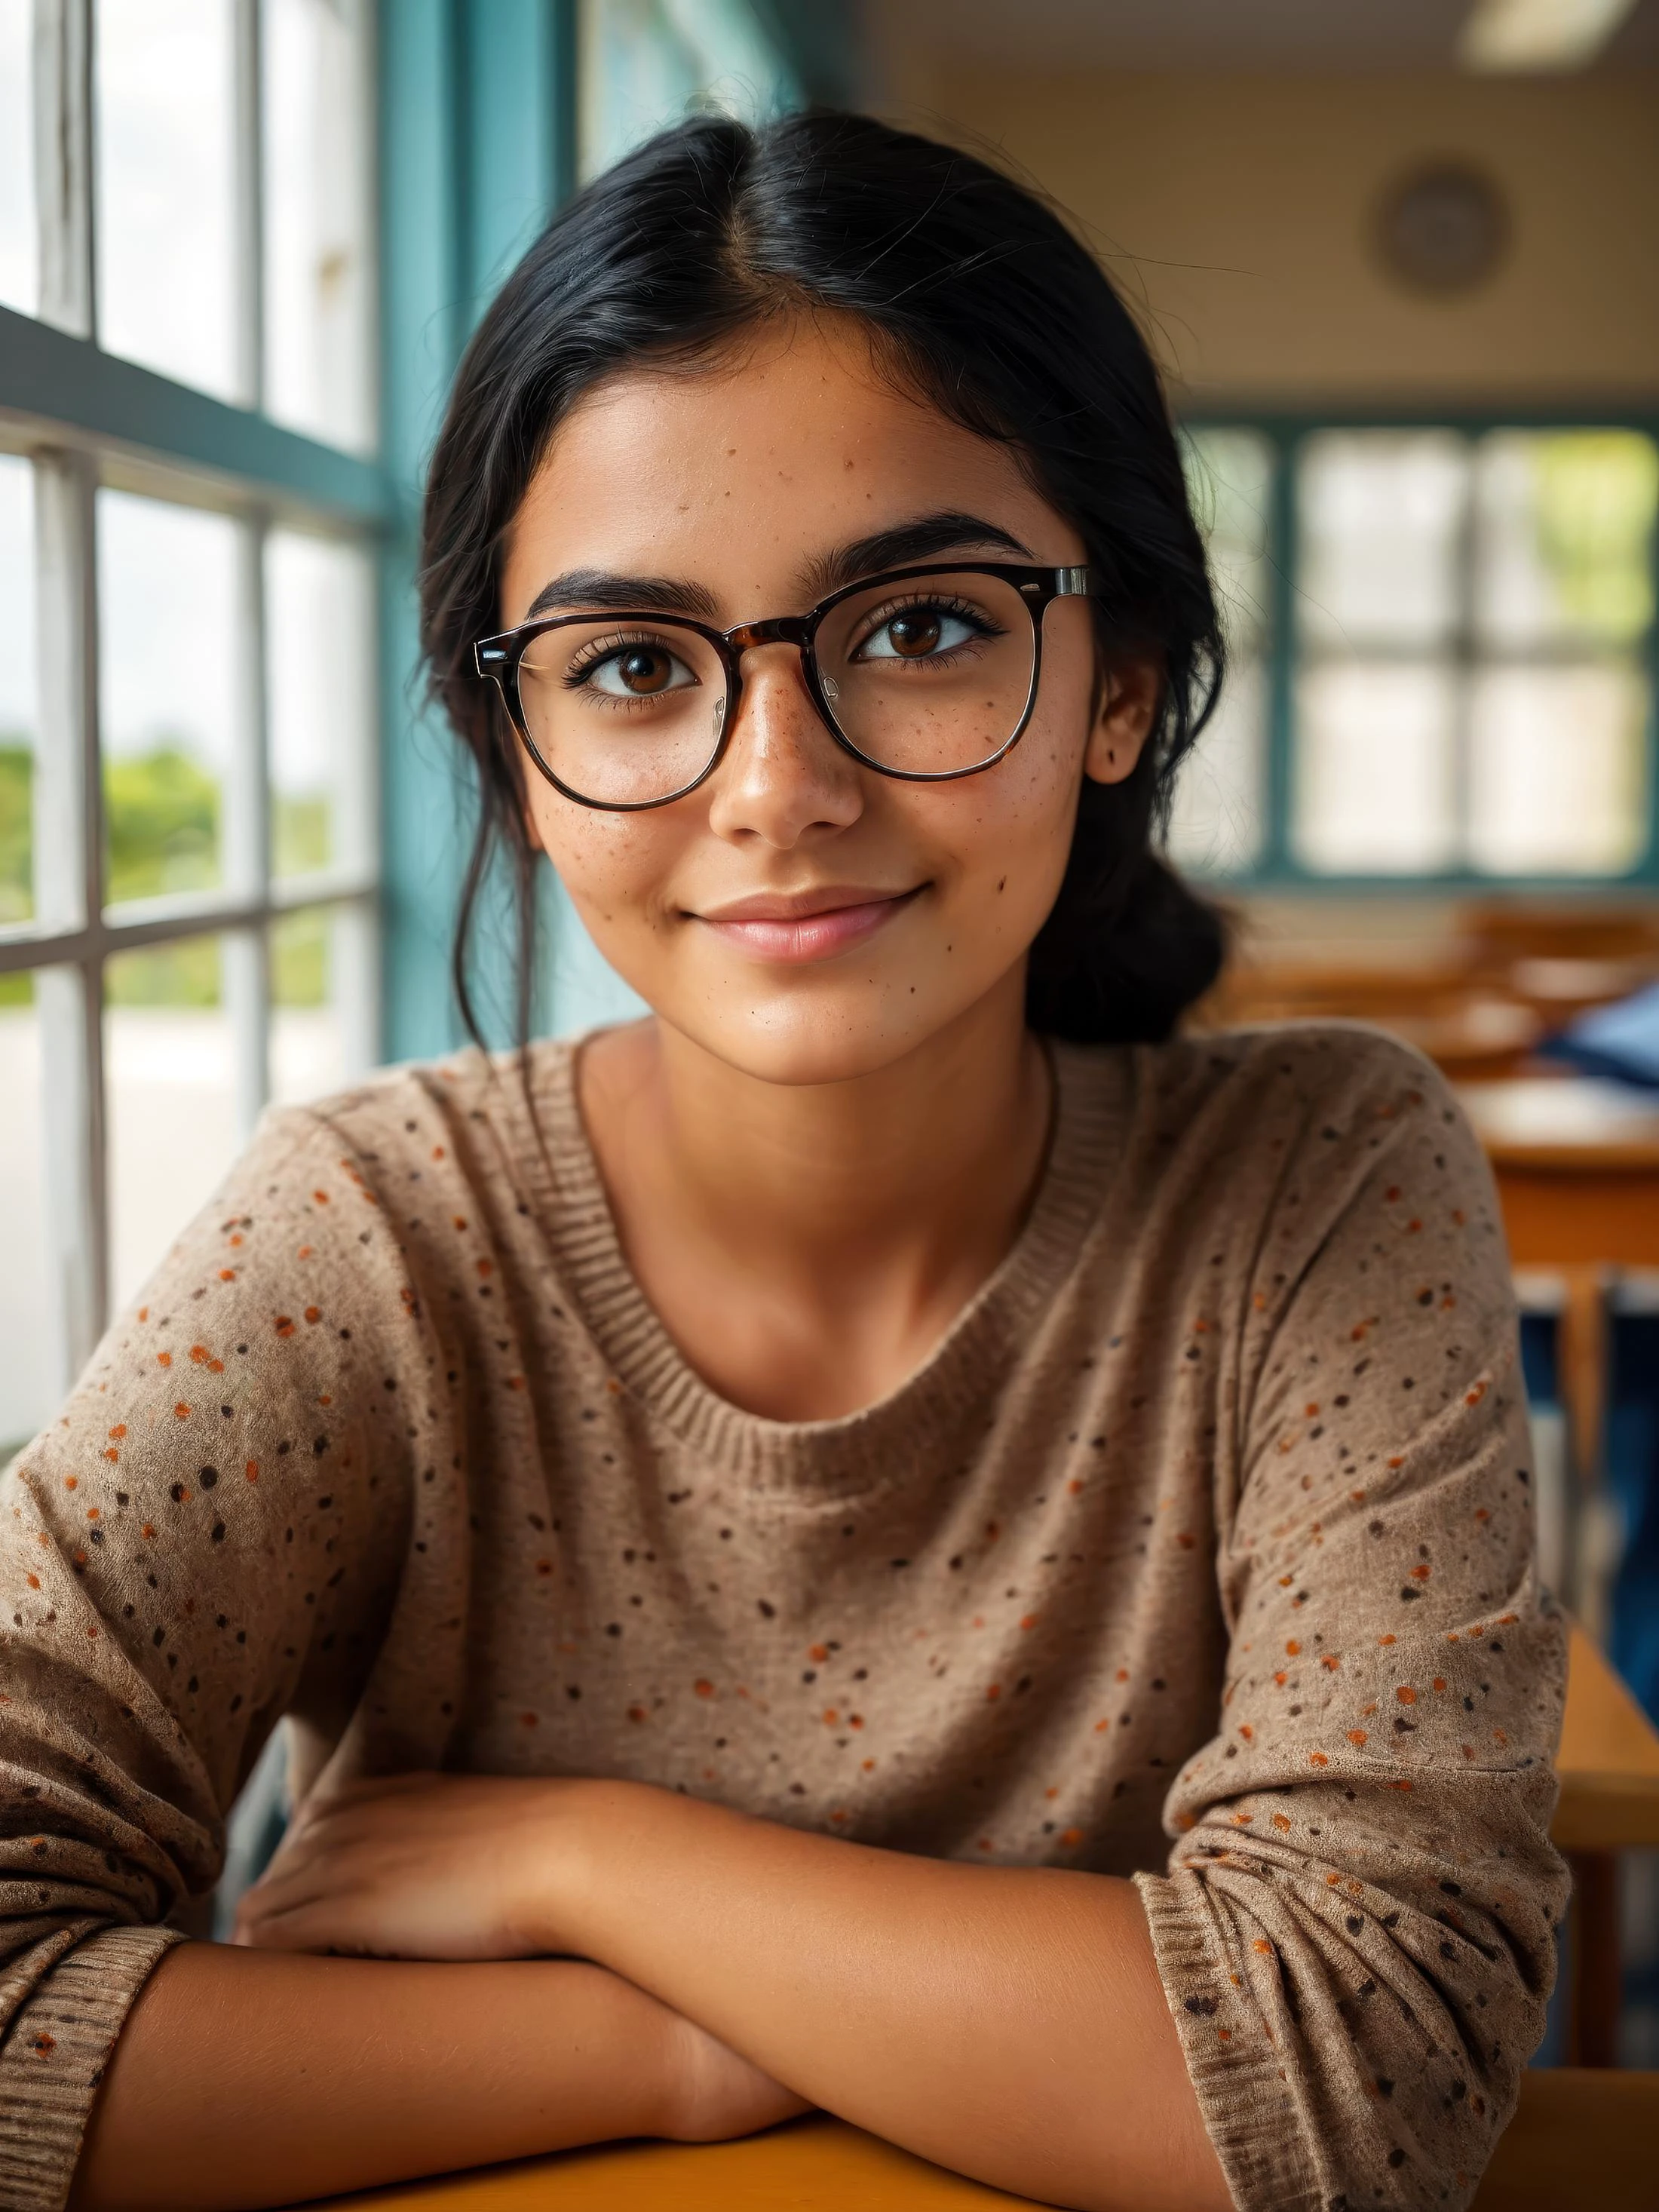 (photography,realistic:1.4),
23yo ,female,black hair,smart looking,maldivian,classroom looking out of window,cinematic lighting,Highly detailed eyes, highly detailed face, brown eyes,freckles,glasses,smiling